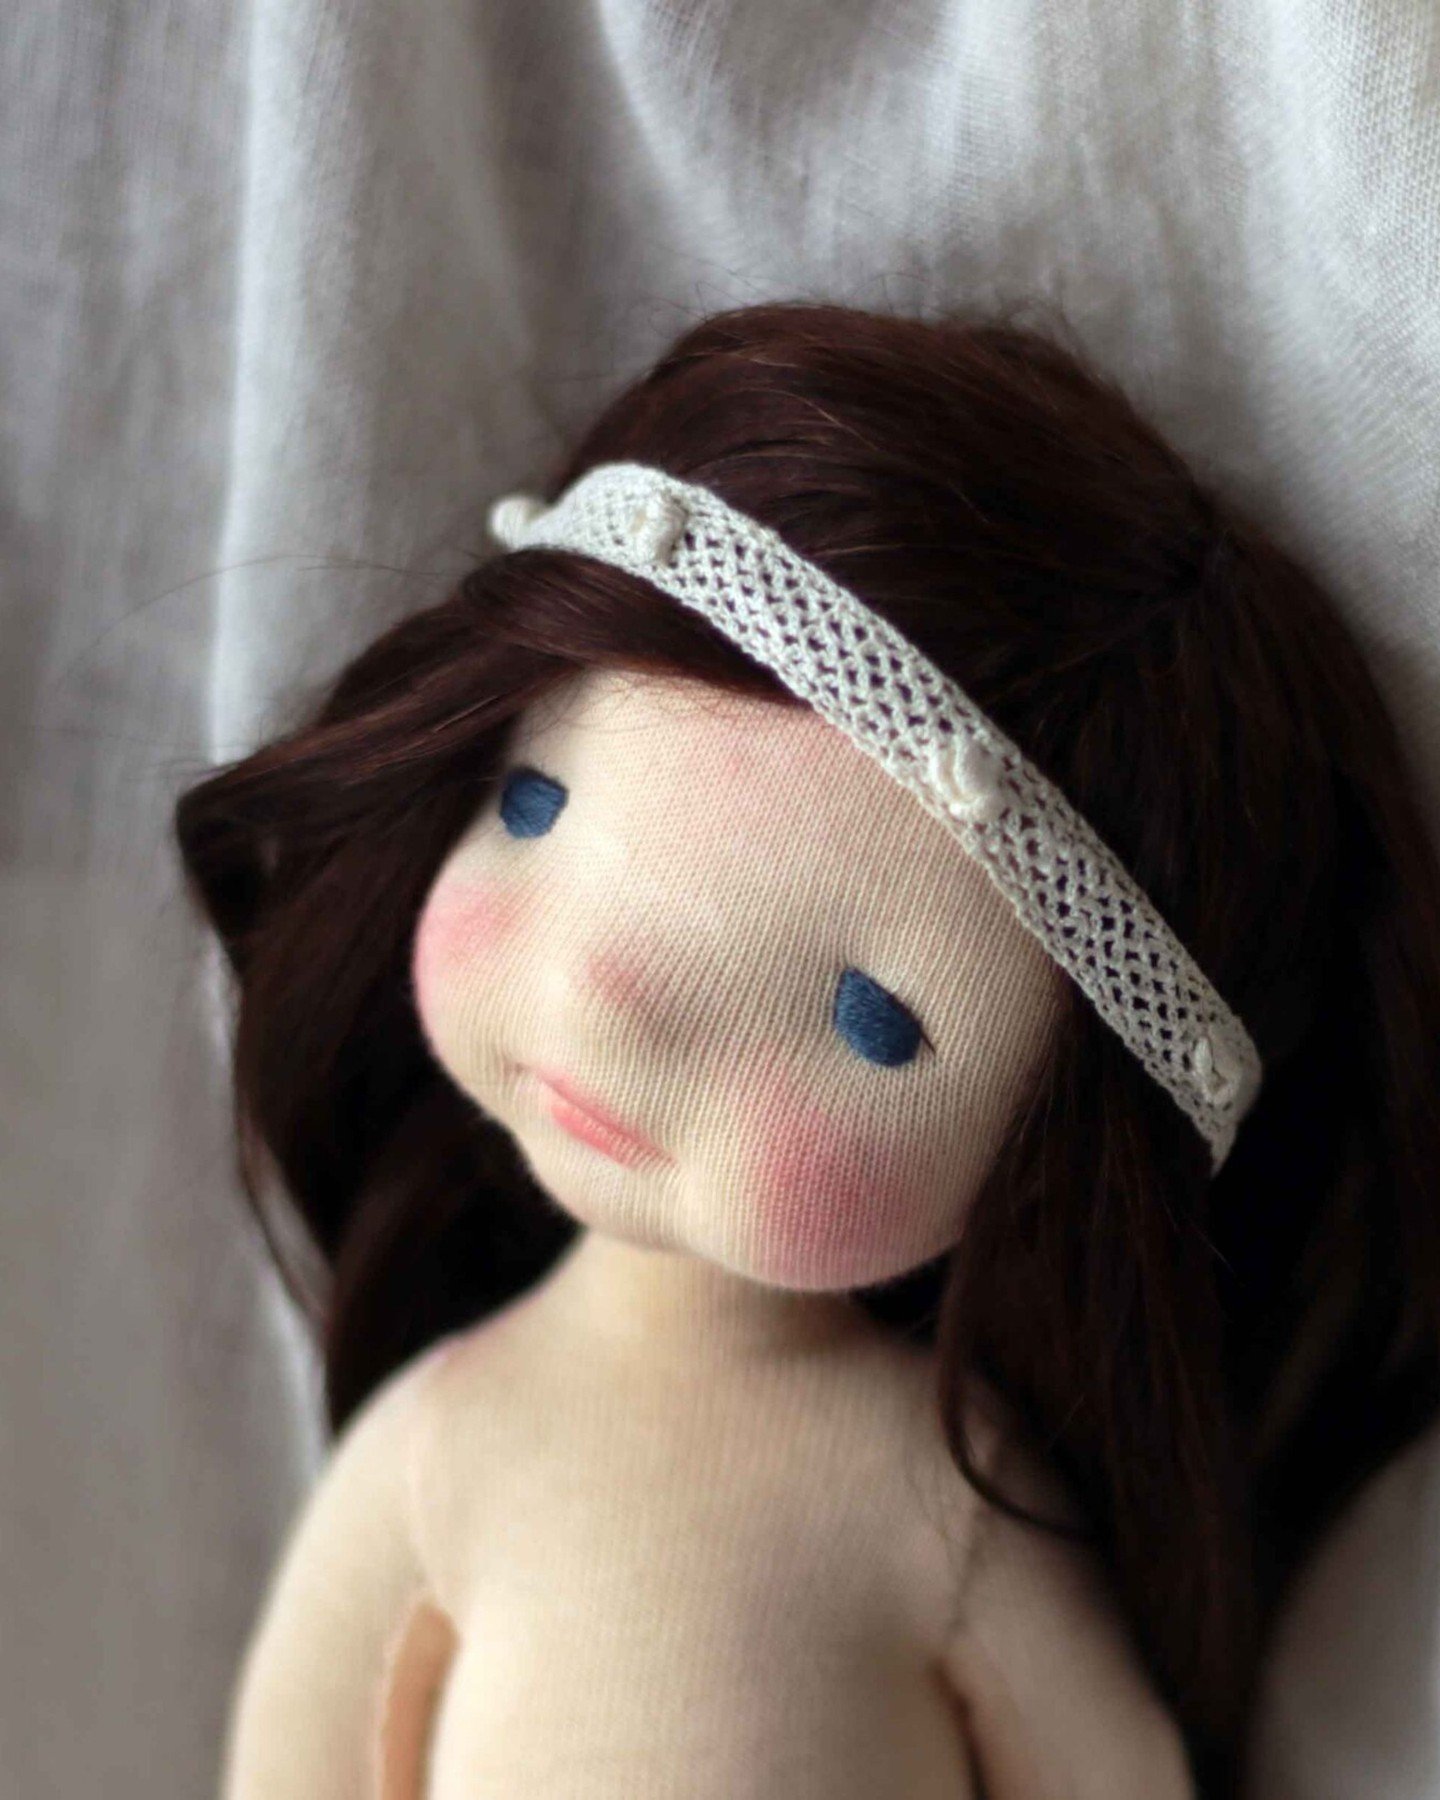 Currently working on another little girl inspired loosely by this beauty (this one is called Henrietta Swan and you can find her on my blog or Google).

It feels so nice to get back to work: handling wool, sewing little thumbs and anticipating all th